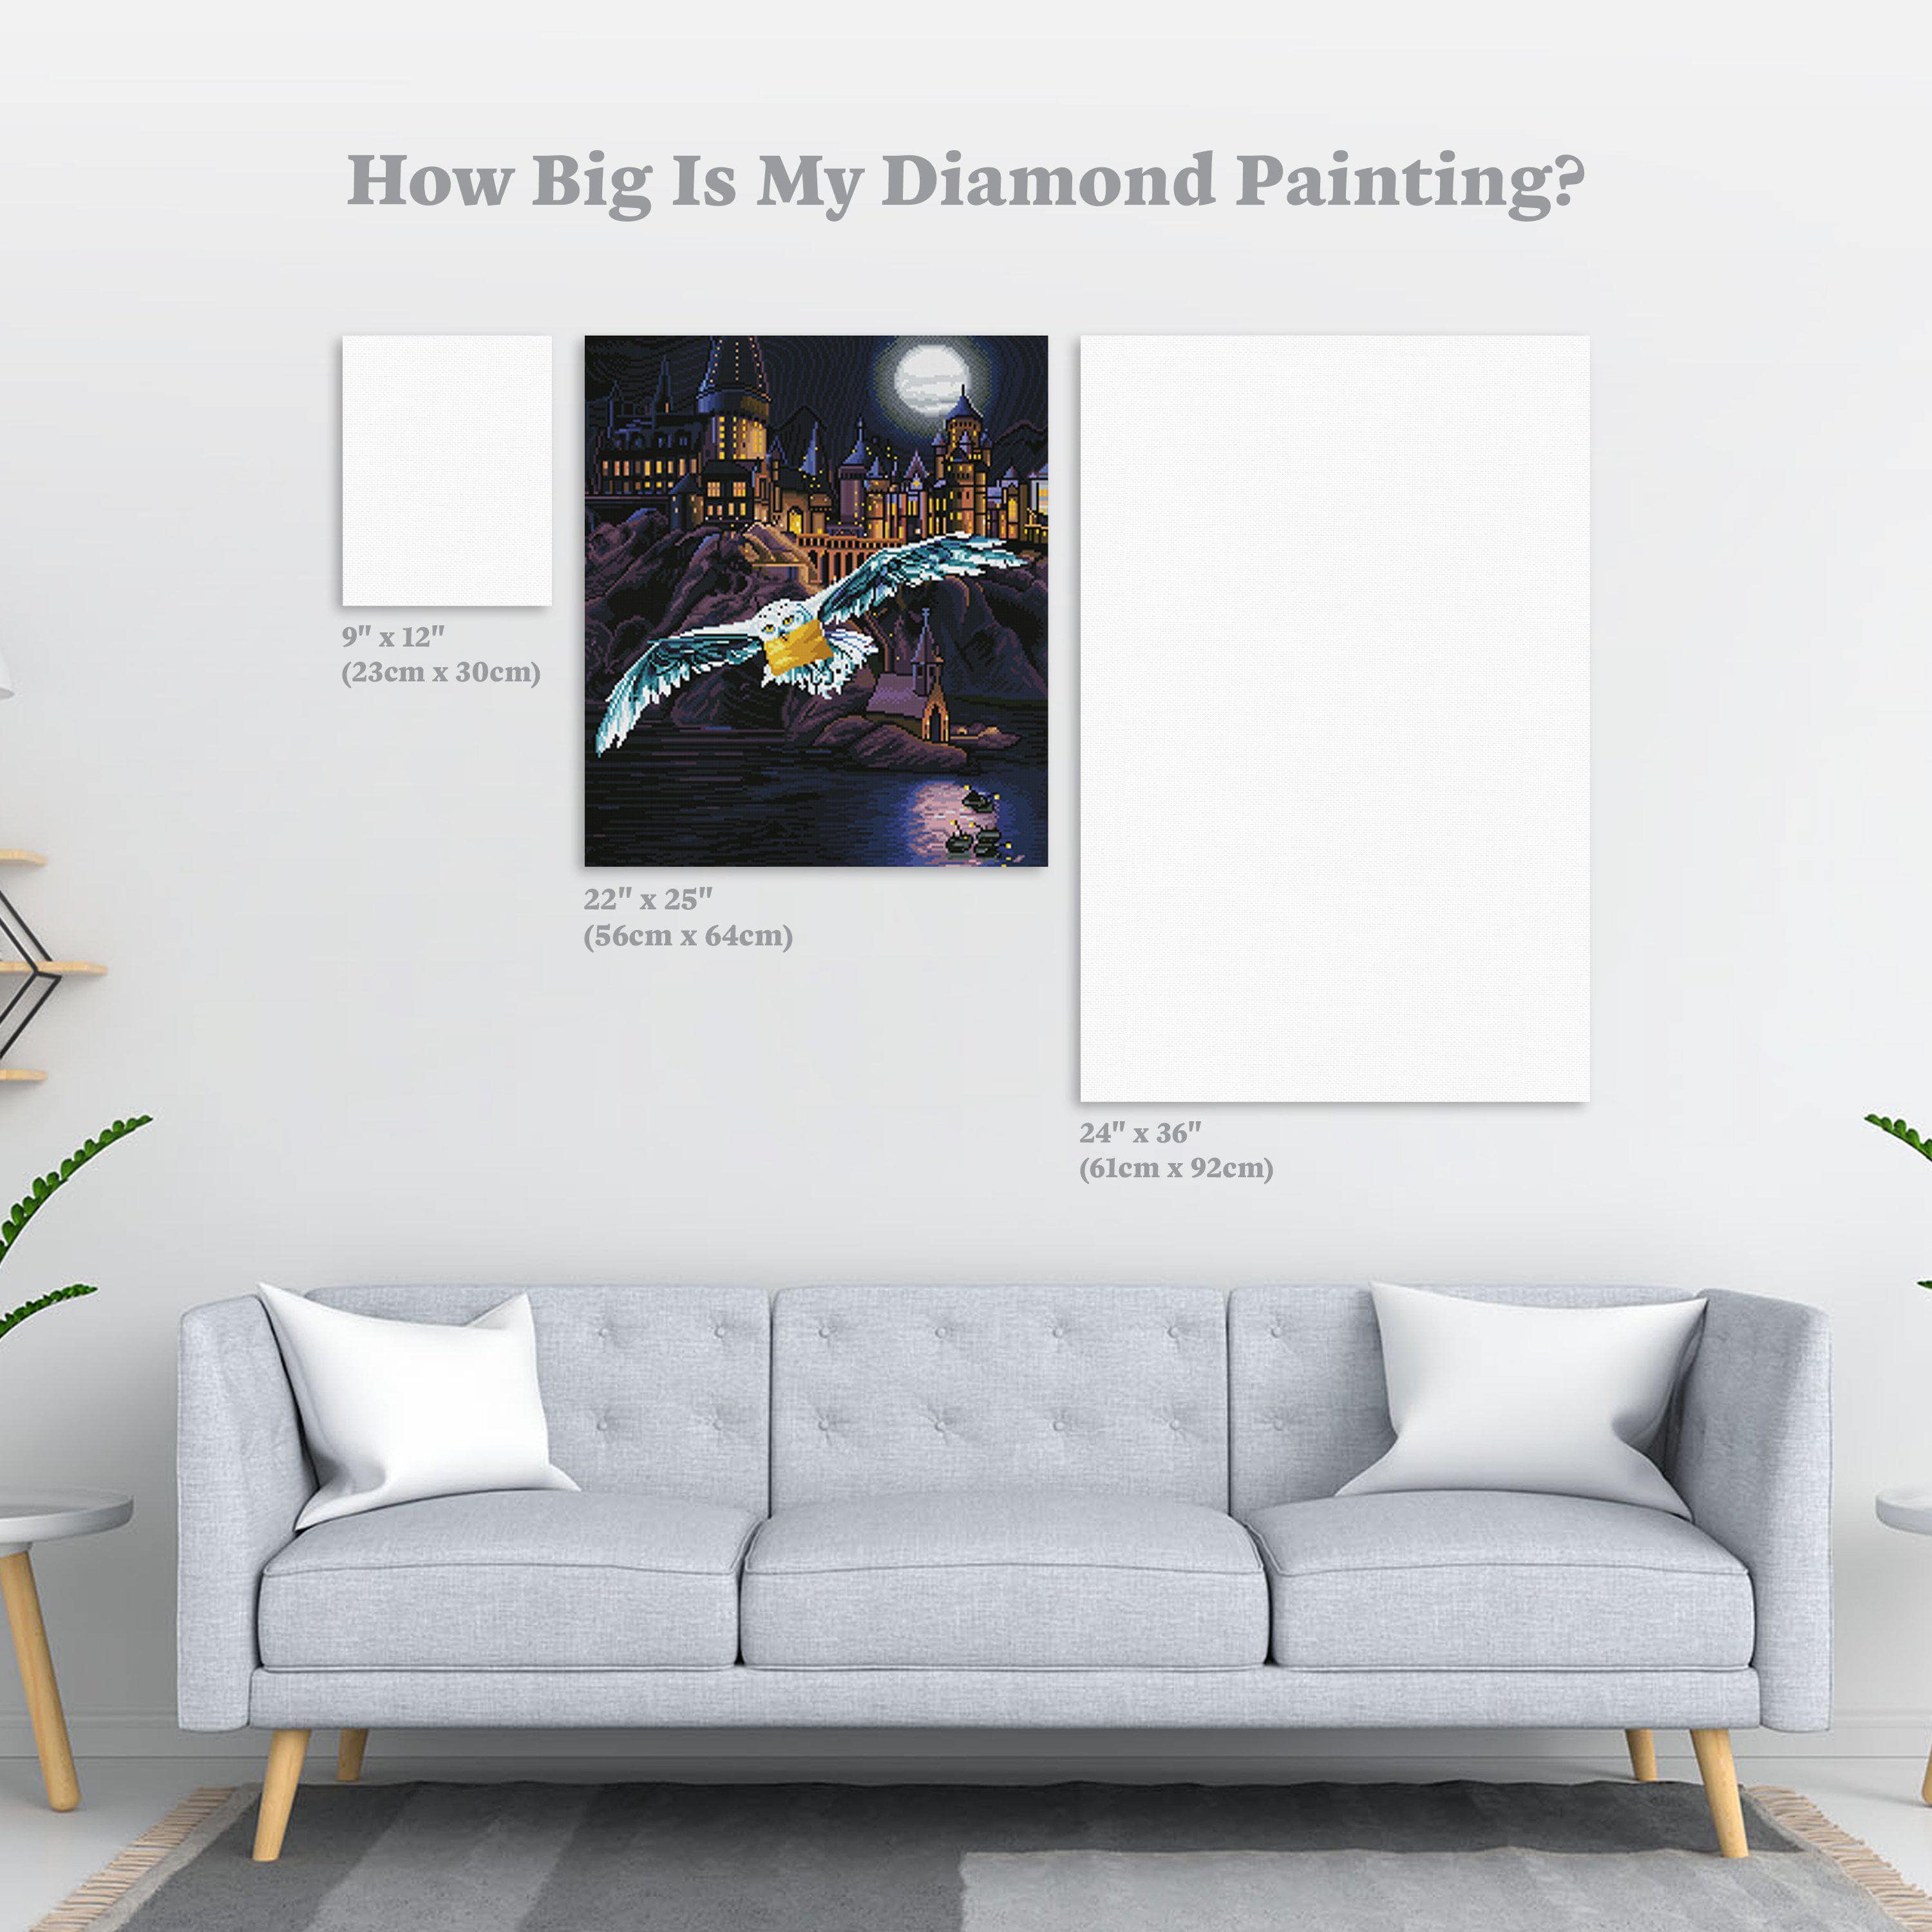 Diamond Painting Post Review ll Hogwarts and Hedwig from Diamond Art Club  